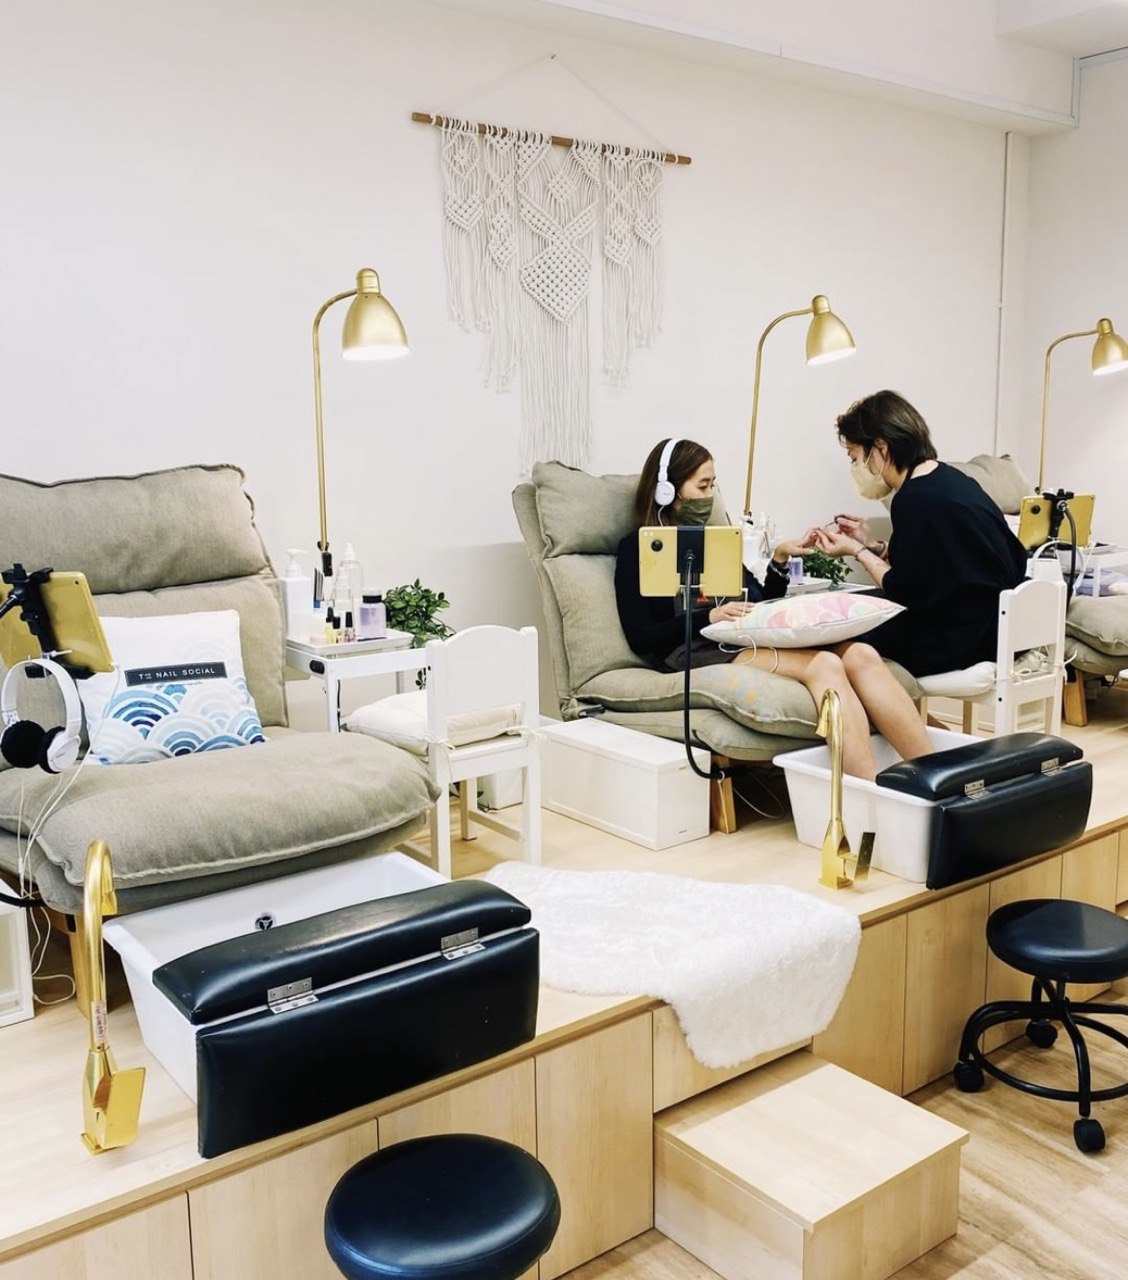 The Social Space in Chinatown - nail salon